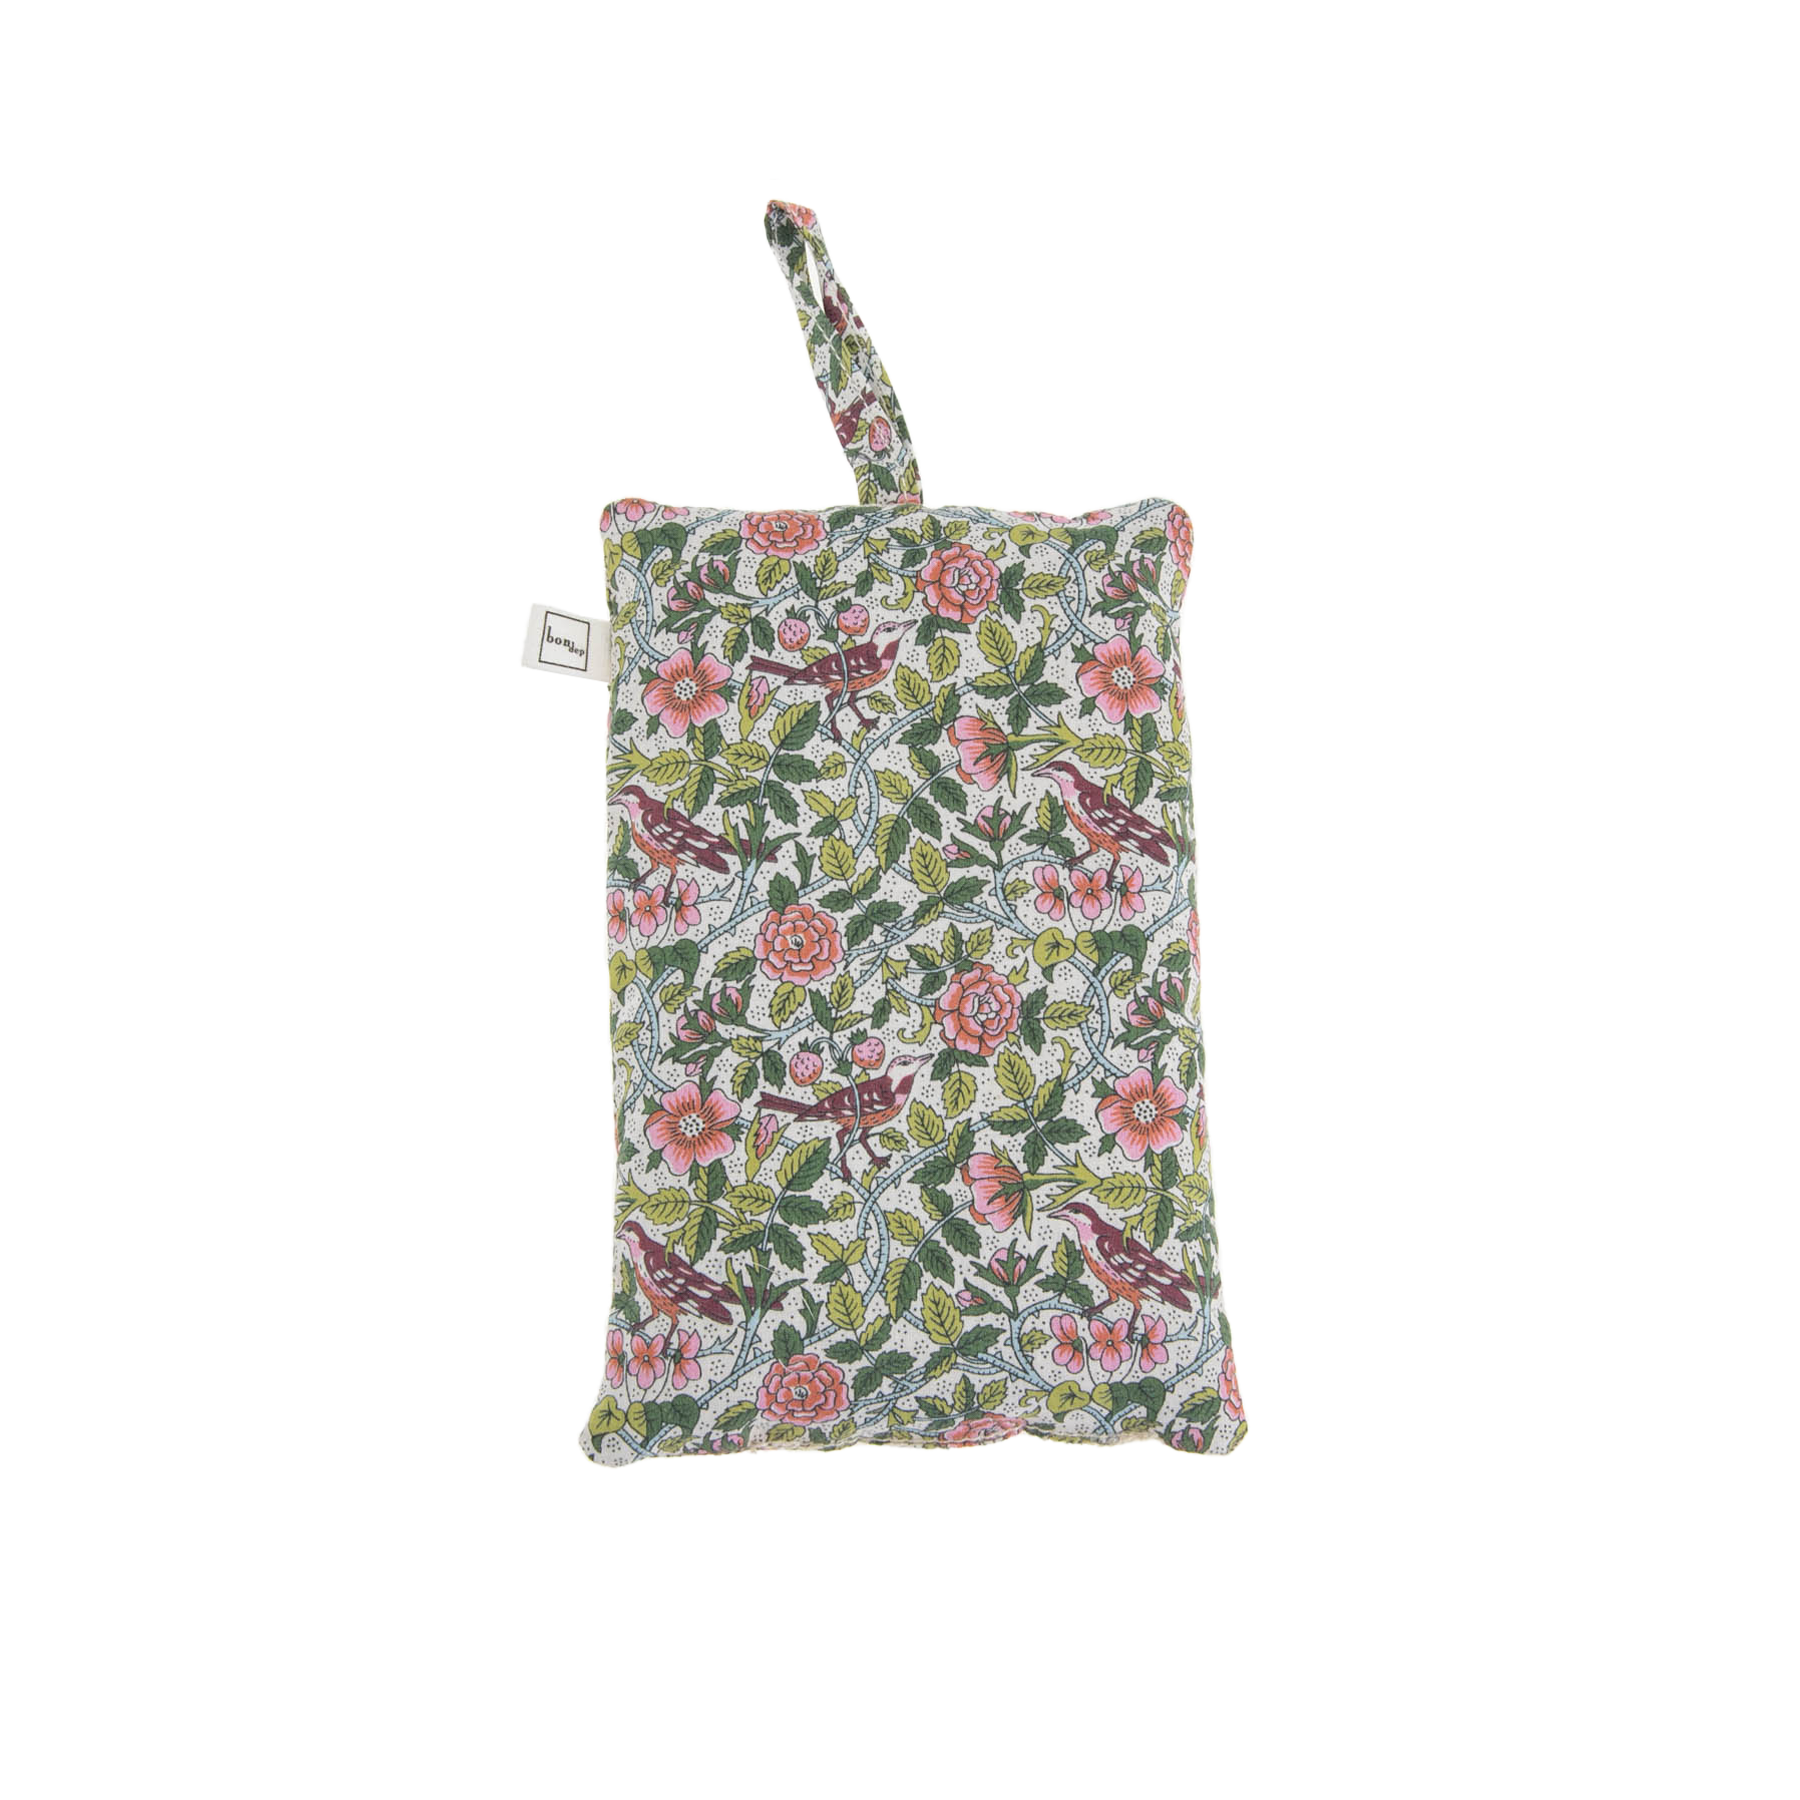 Image of Lavender bags mw Liberty Strawberry Tree Green from Bon Dep Essentials